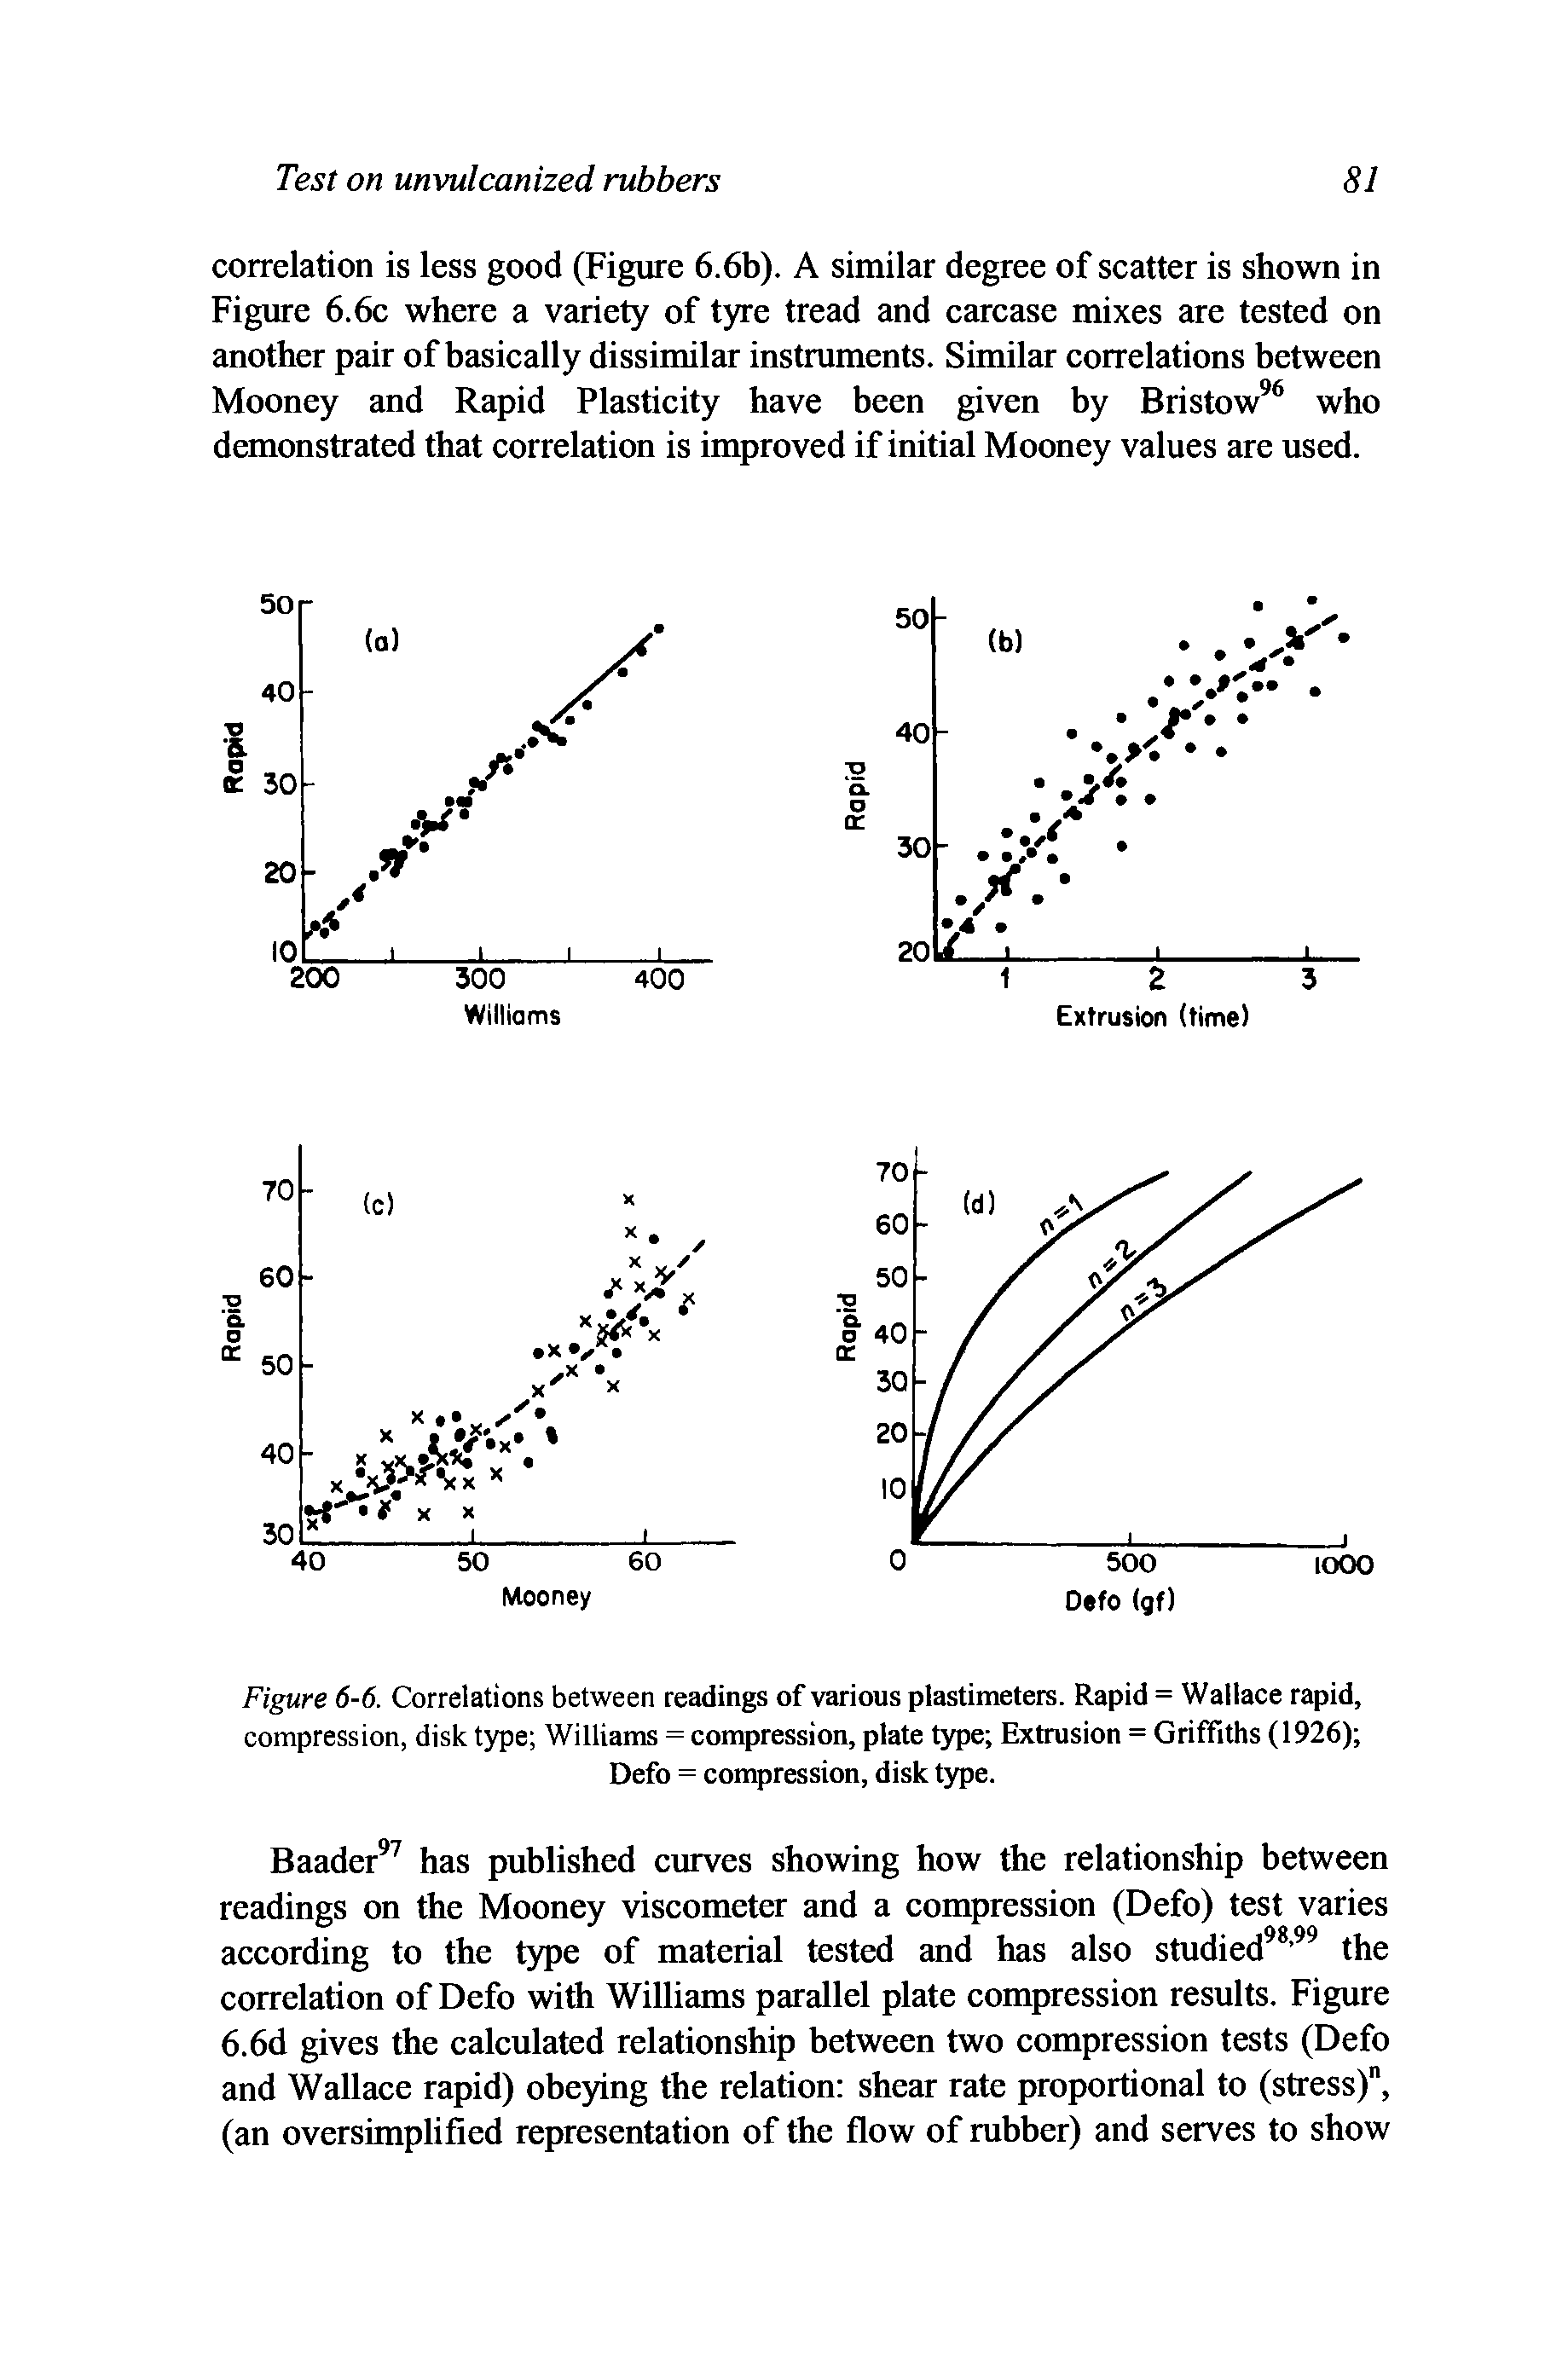 Figure 6-6. Correlations between readings of various plastimeters. Rapid = Wallace rapid, compression, disk type Williams = compression, plate type Extrusion = Griffiths (1926) ...